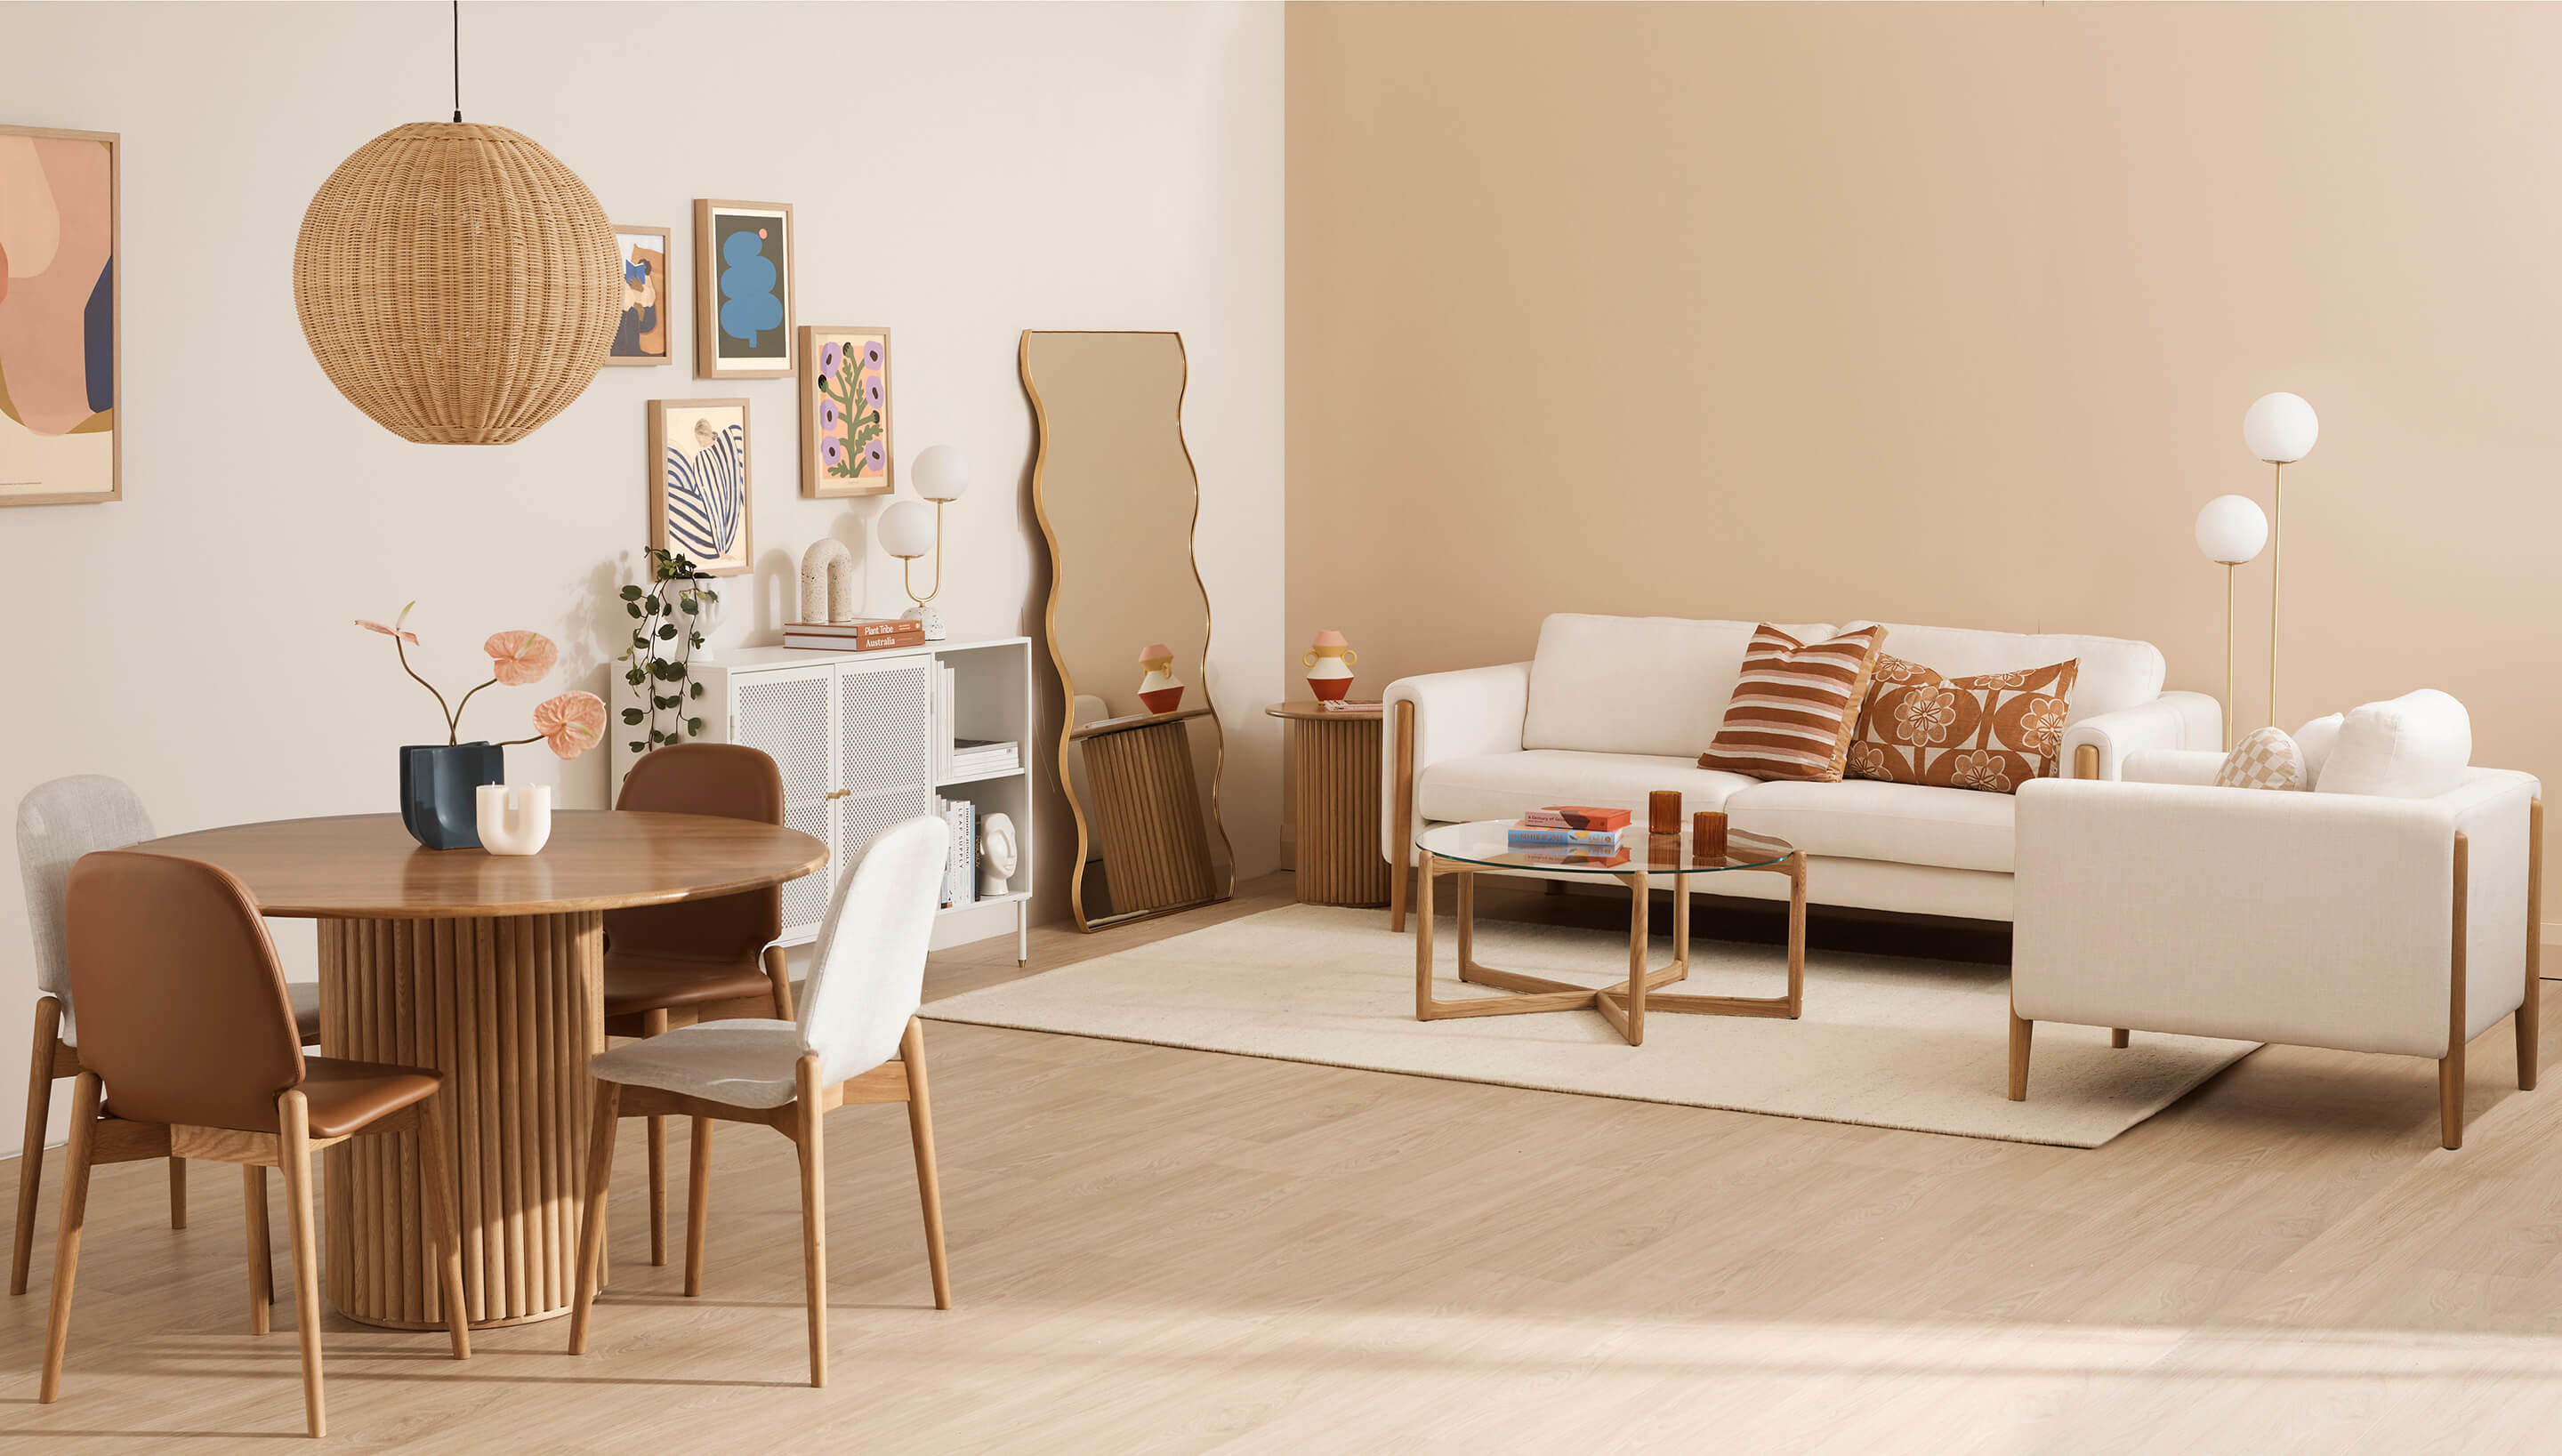 Introducing our Abode Spring Summer 22 collection, full of neutral yet fun living, dining, home office, and bedroom spaces. Shop the collection online or in-store now!